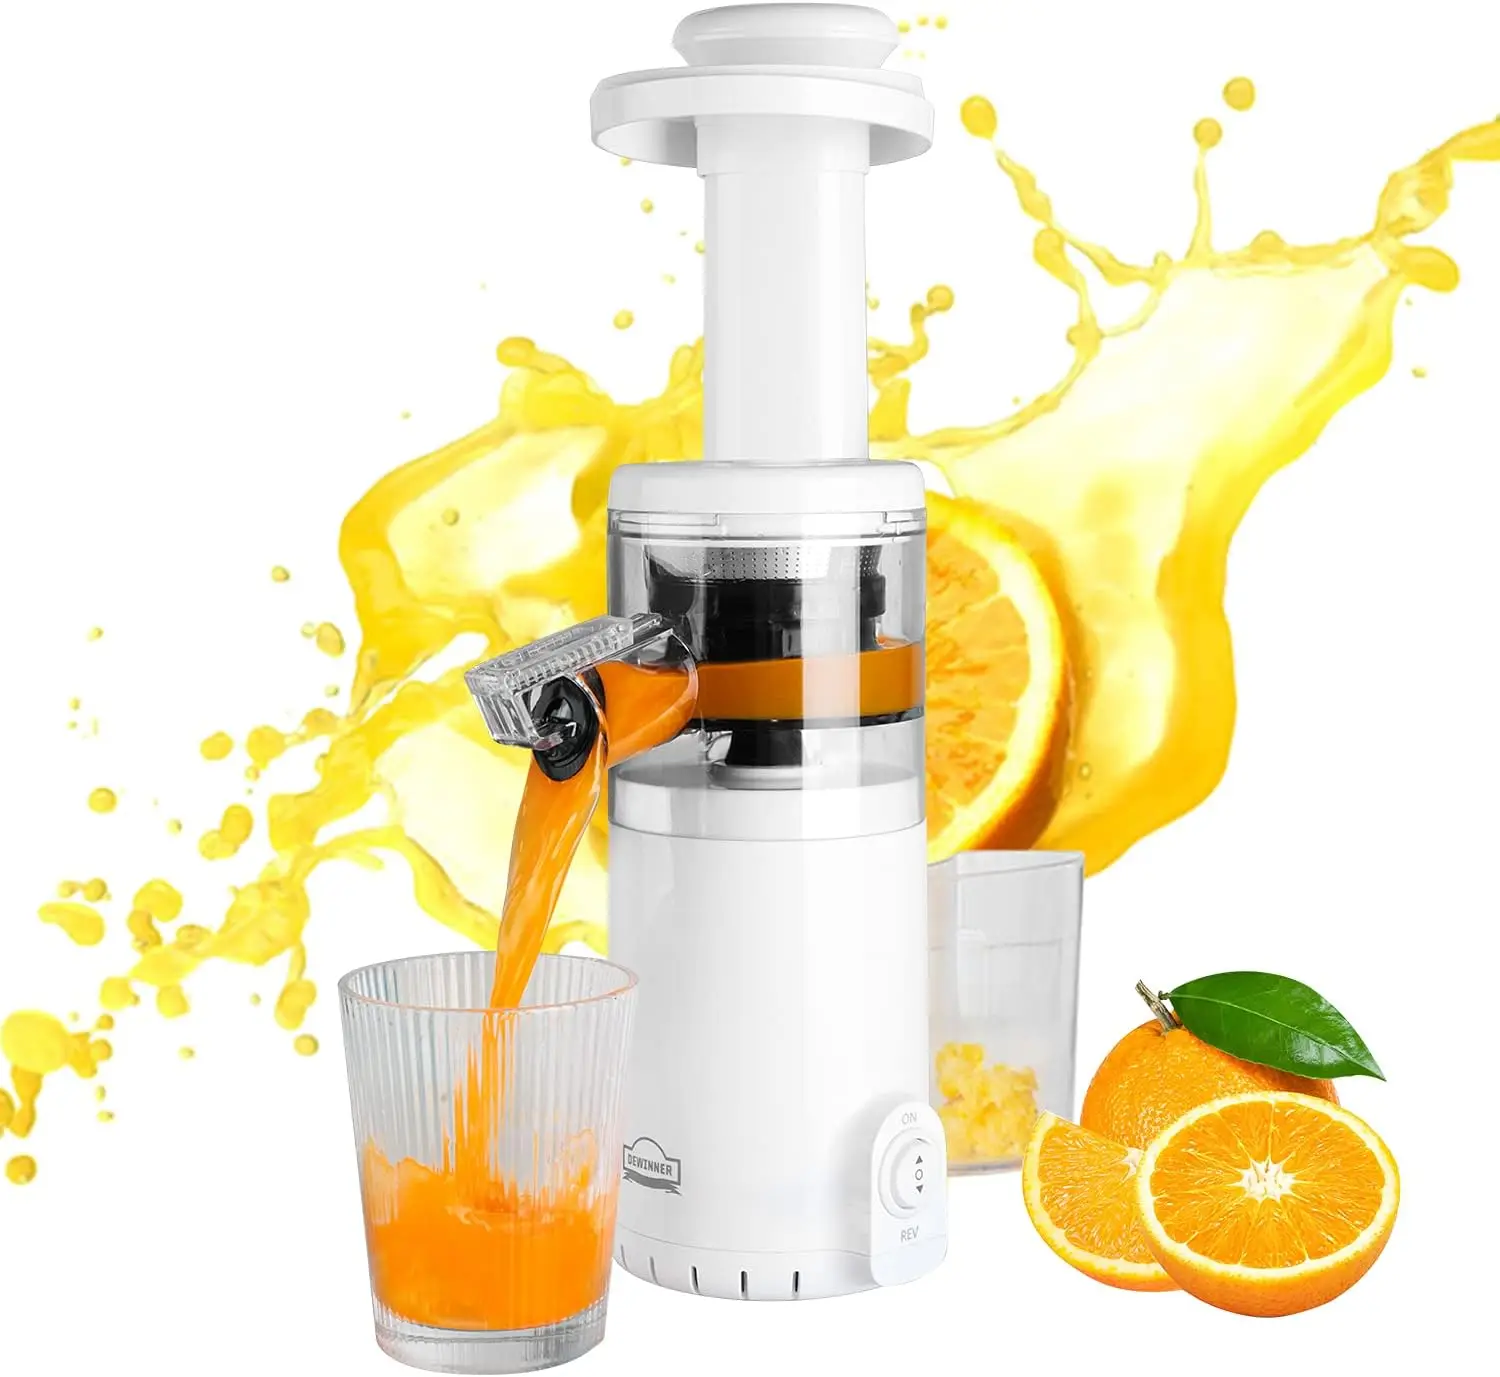 

Masticating Mini Juicer Extractor Easy to Clean, Cold Press Juicer Machine with quiet motor for High Nutrient Fruit & Vegeta